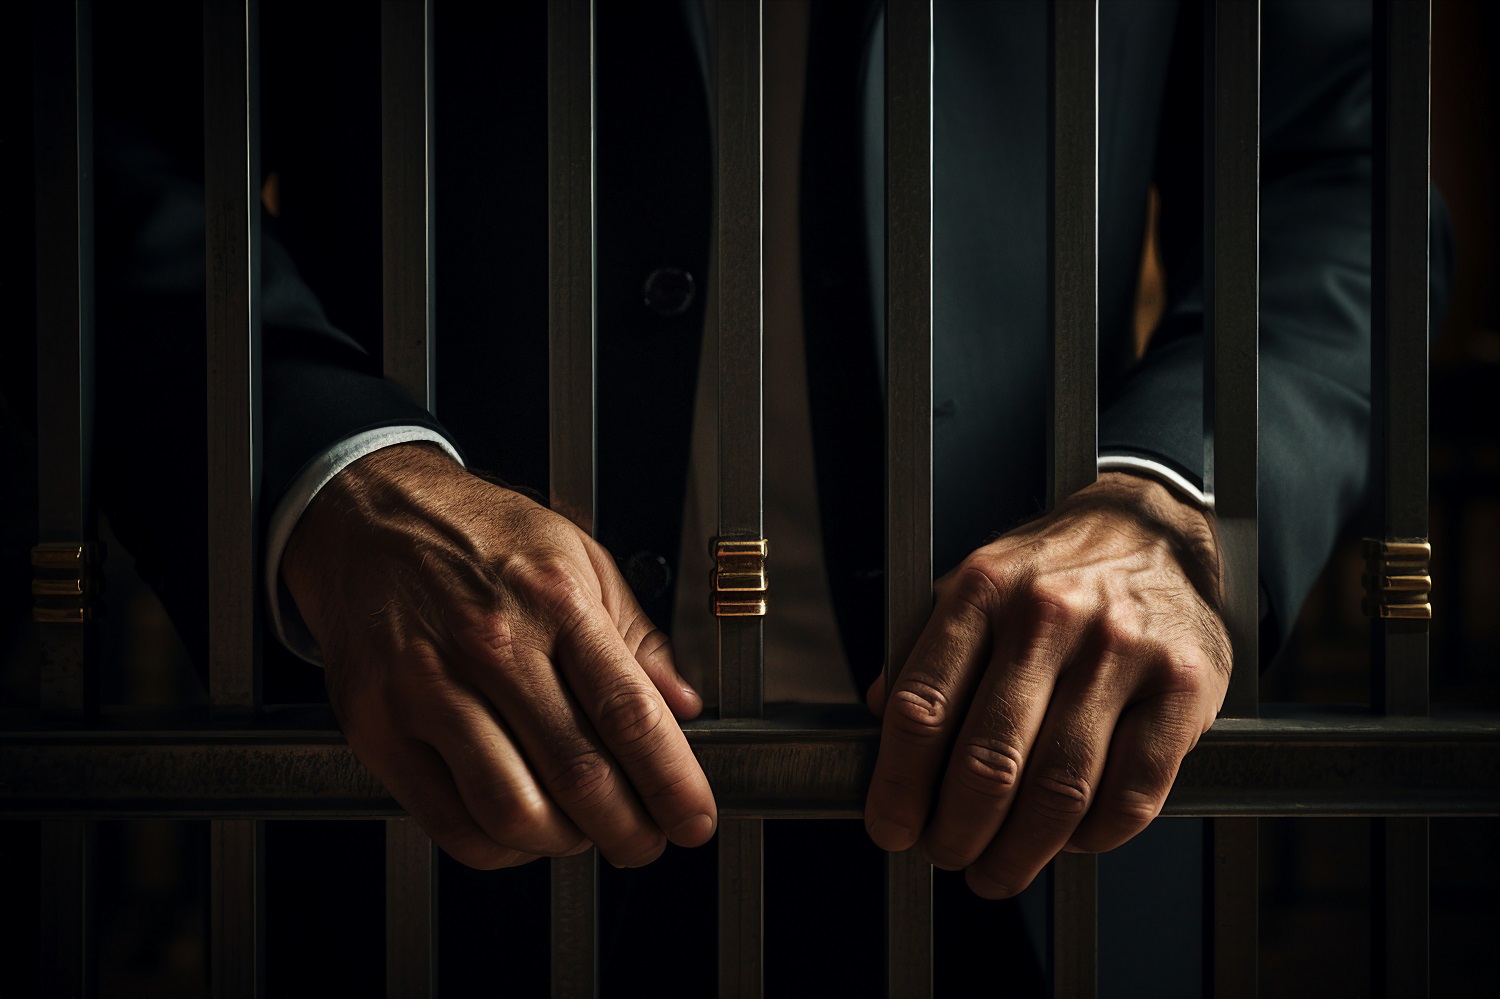 A person wearing a suit holds a bar on a locked prison cell door.